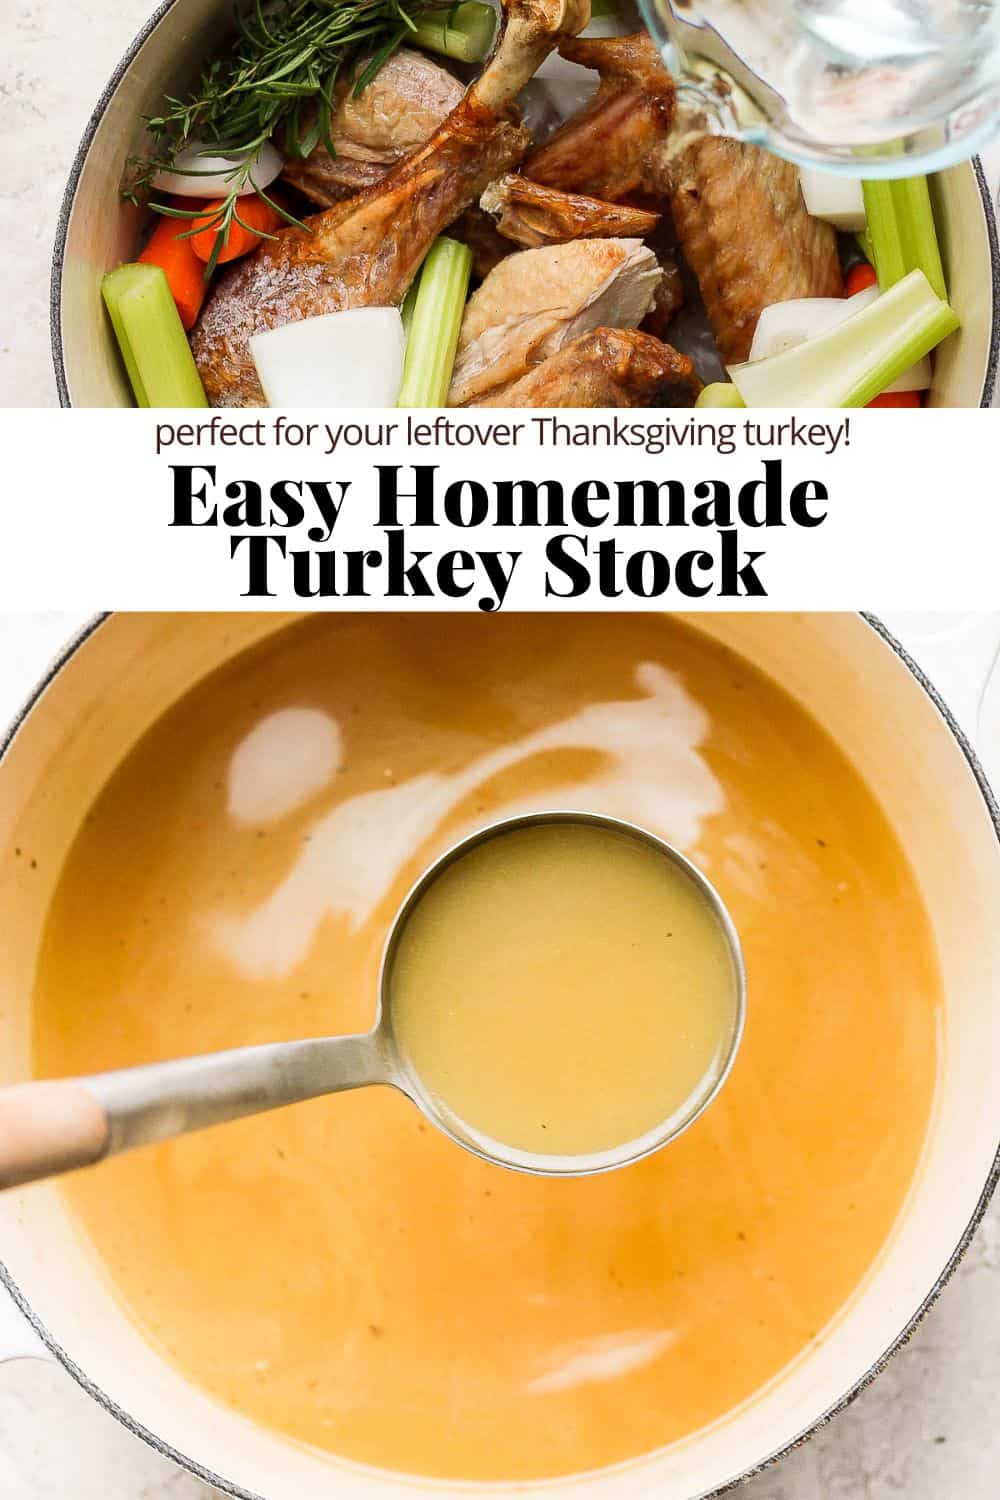 Pinterest image with an image of the stock ingredients in the dutch oven on the top, the recipe title in the middle, and the finished turkey stock on the bottom. 